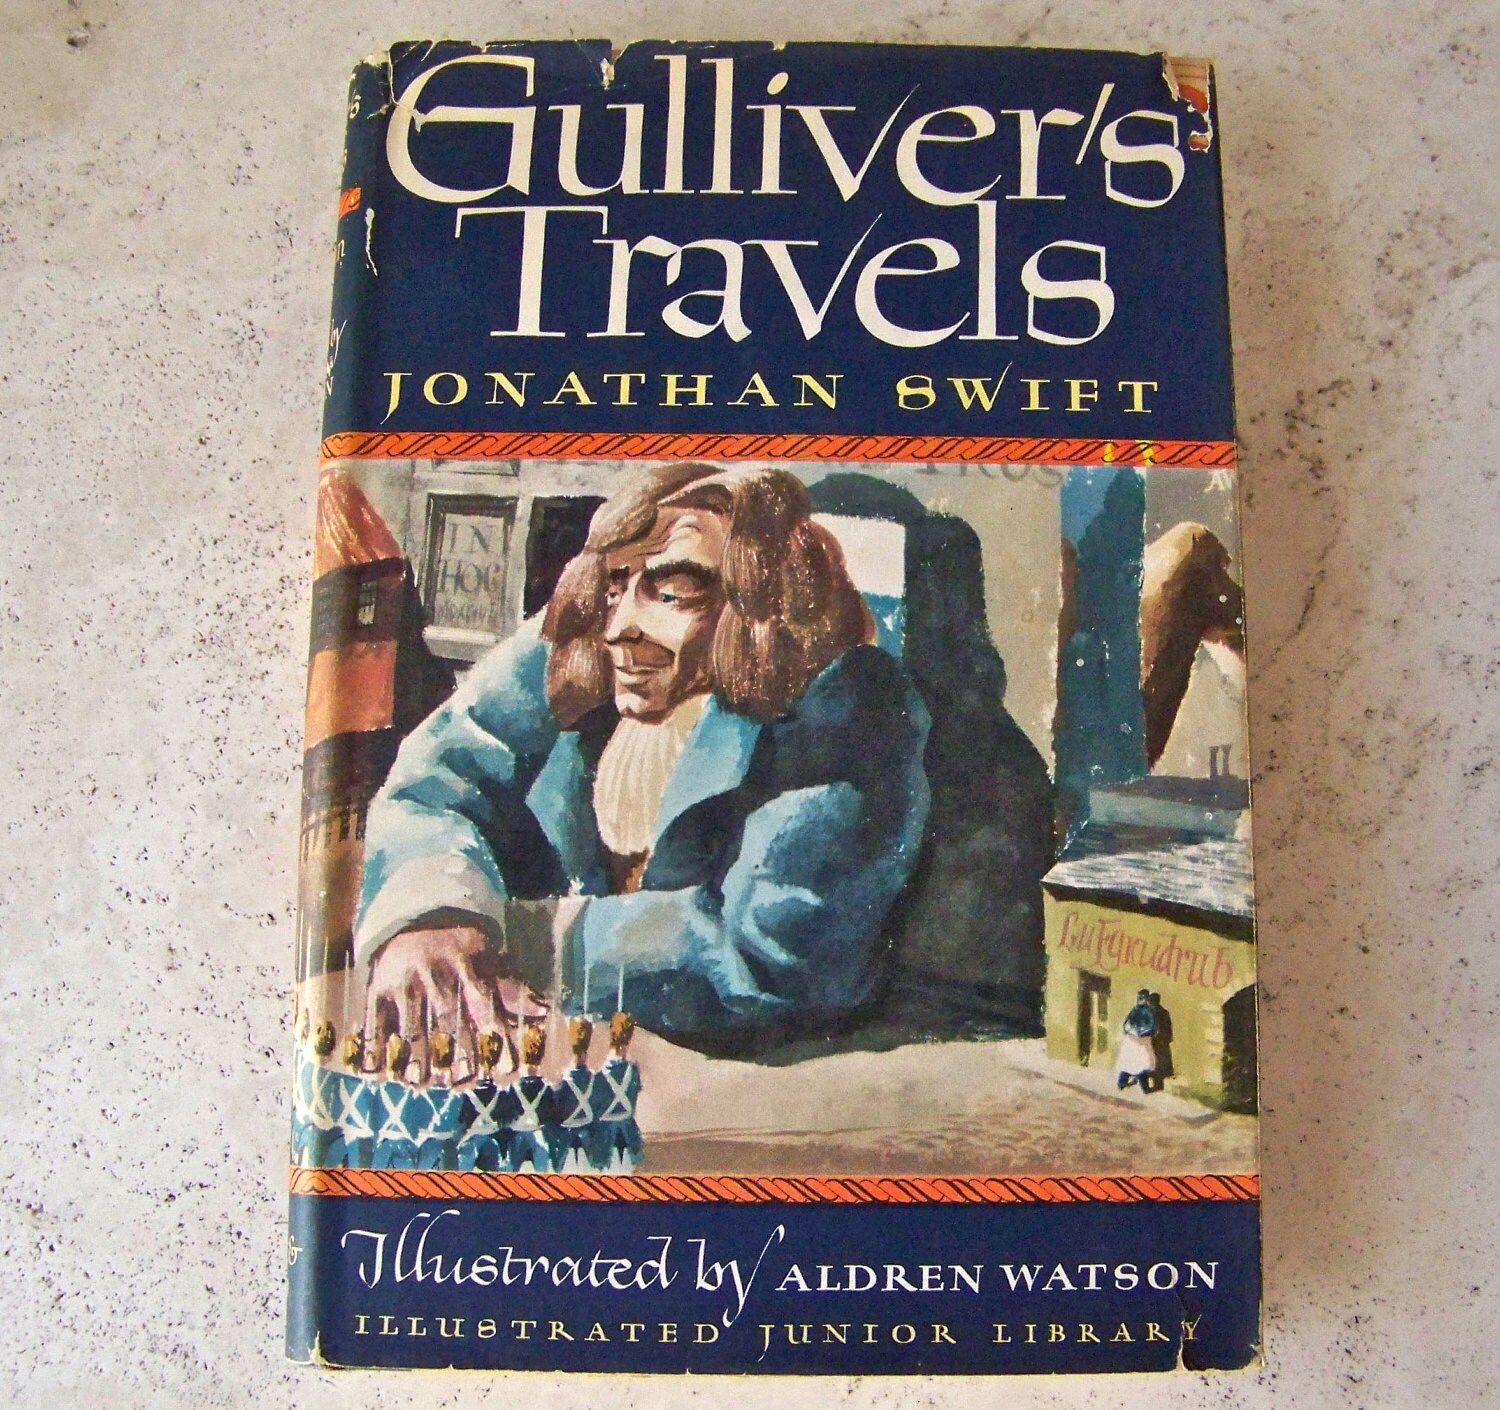 book of travels